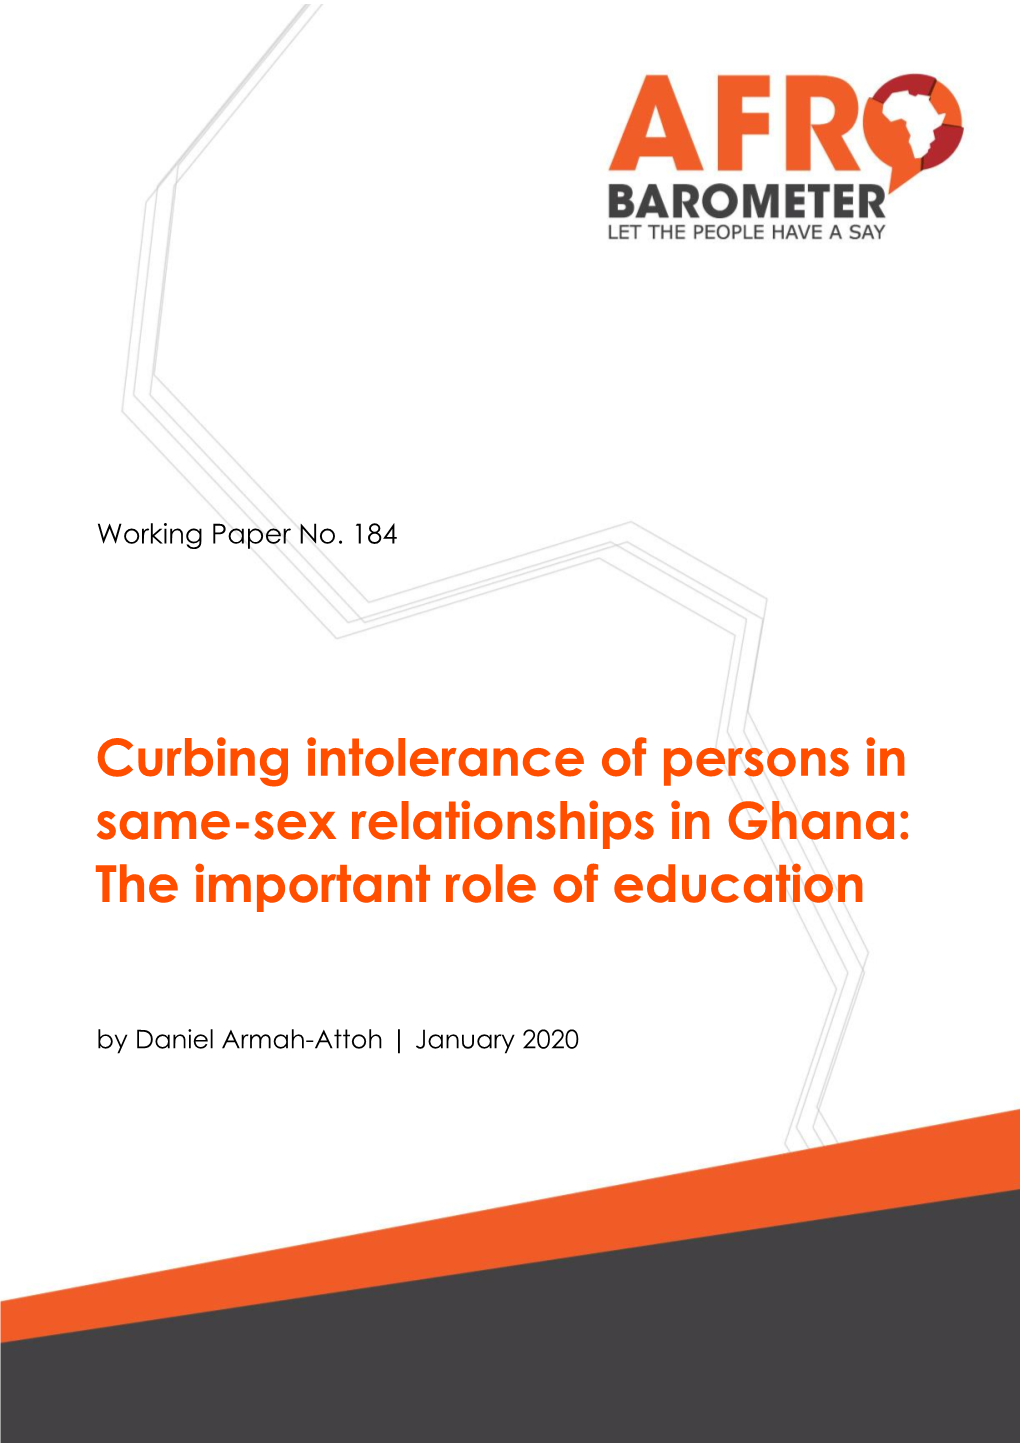 Curbing Intolerance of Persons in Same-Sex Relationships in Ghana